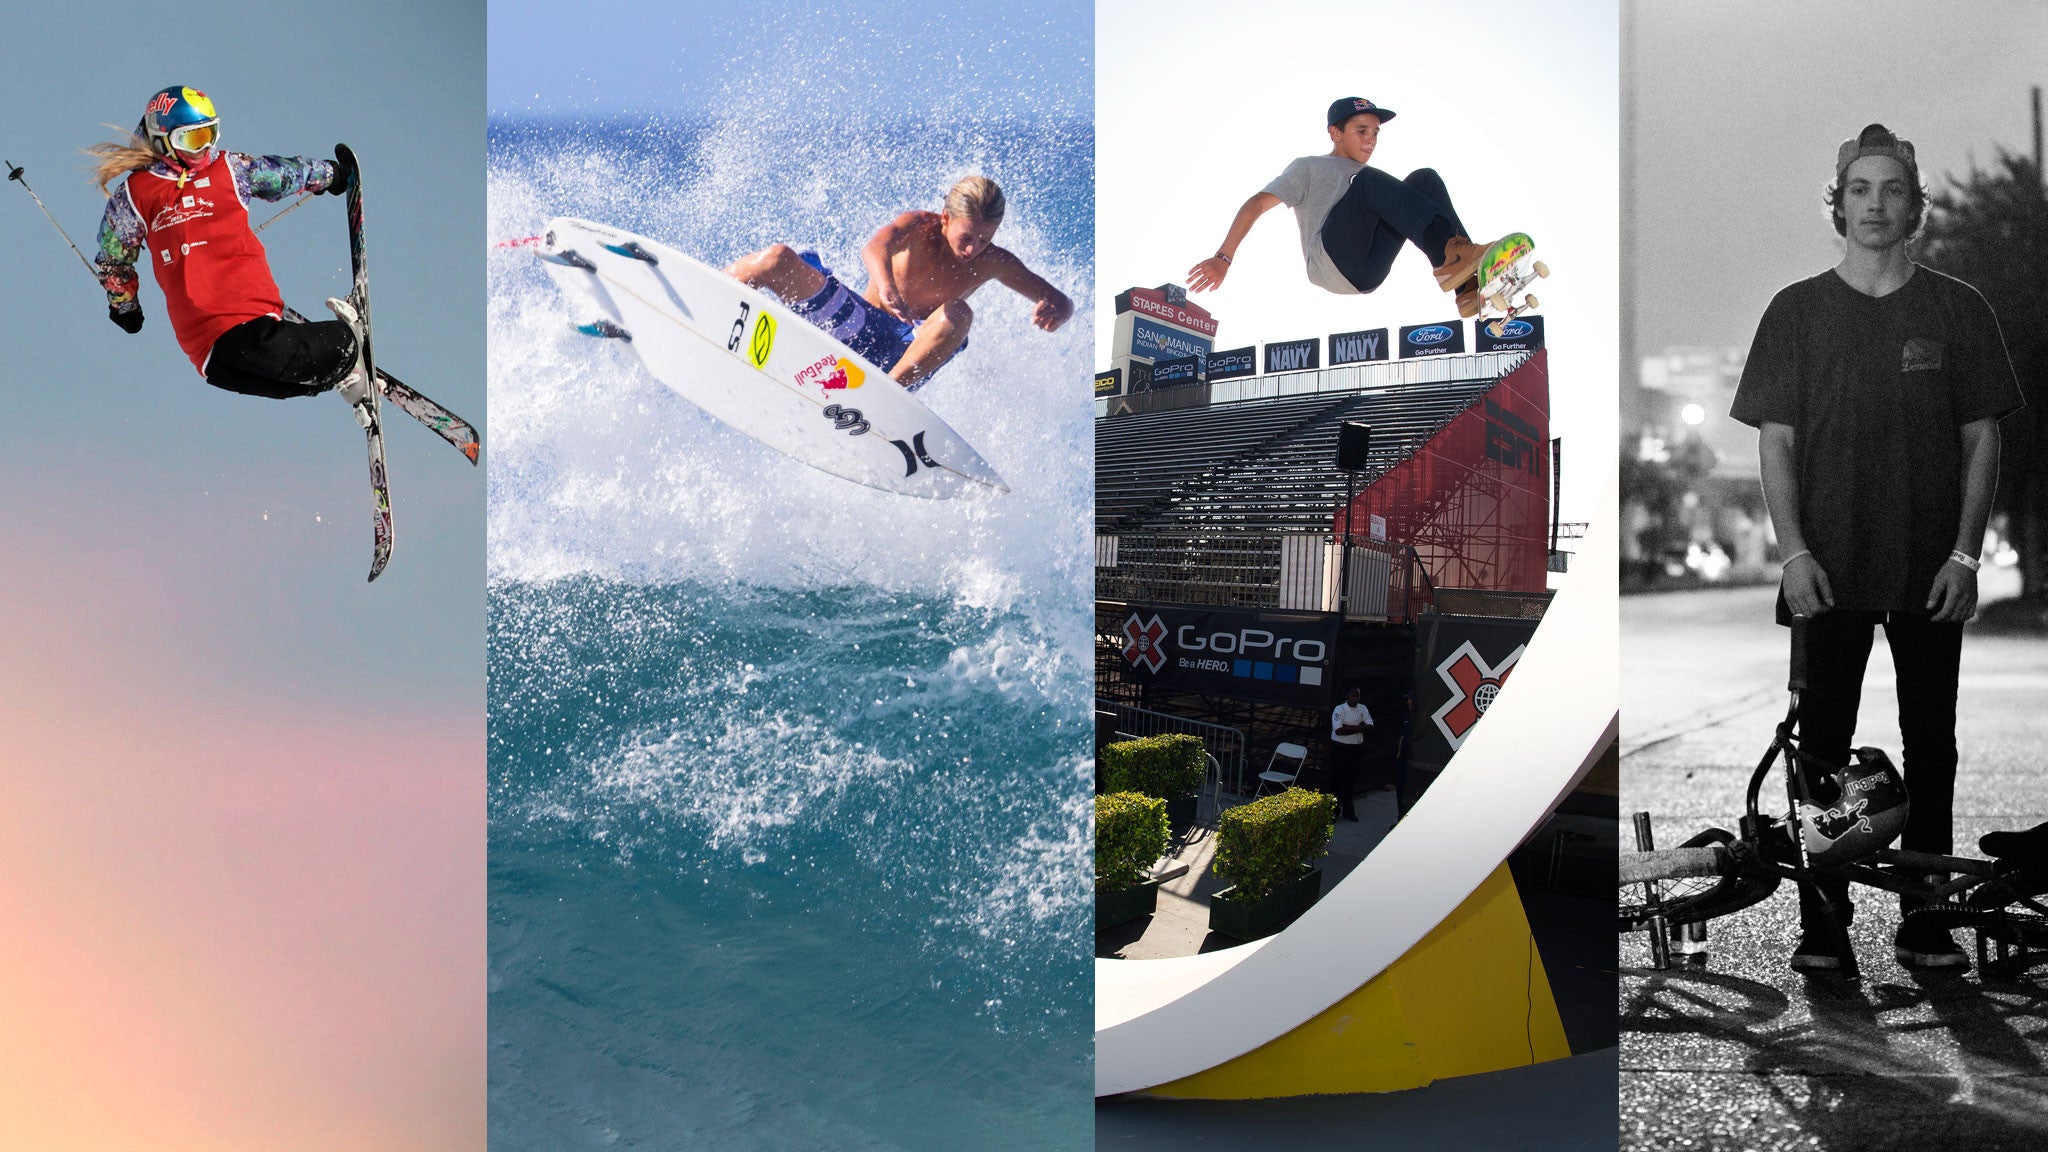 3 Action Sports Worth Getting Into